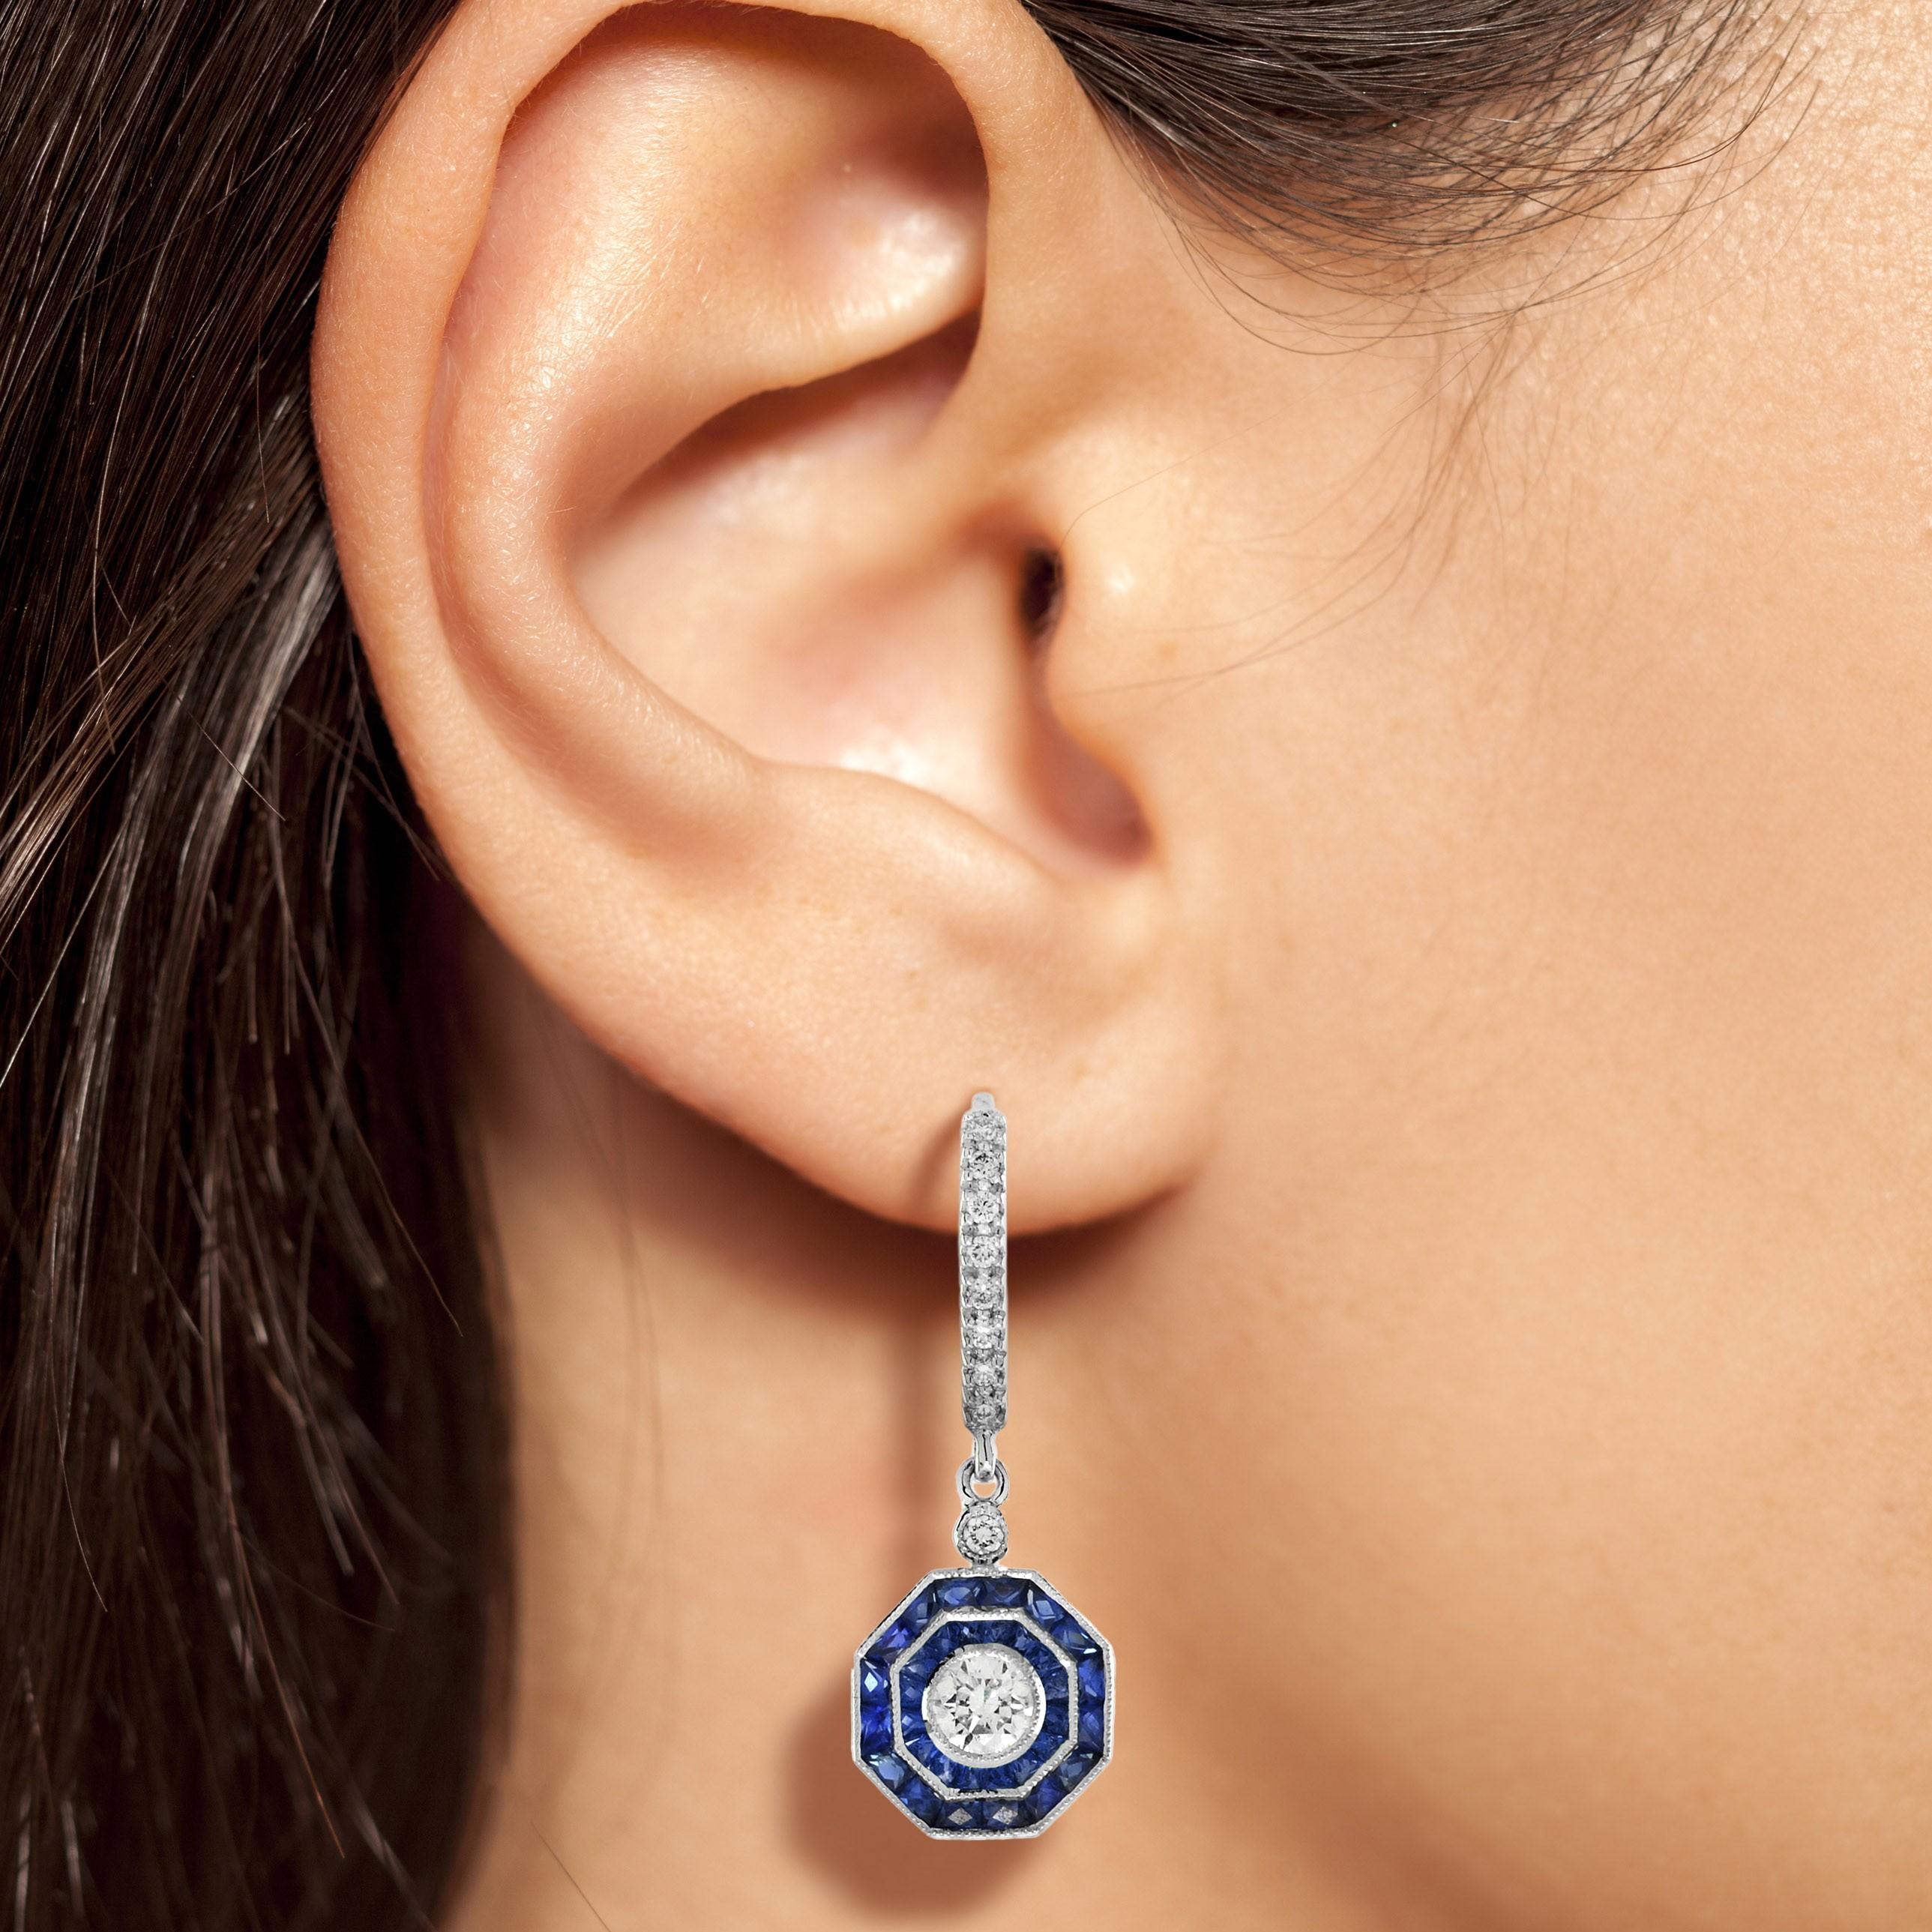 Exquisite early Art Deco inspired Diamond and Blue Sapphire earrings. The central Diamond is surrounded by finely set double halo sapphires to an outer creating a chic octagonal form. The earrings are perfectly worn with the same design halo